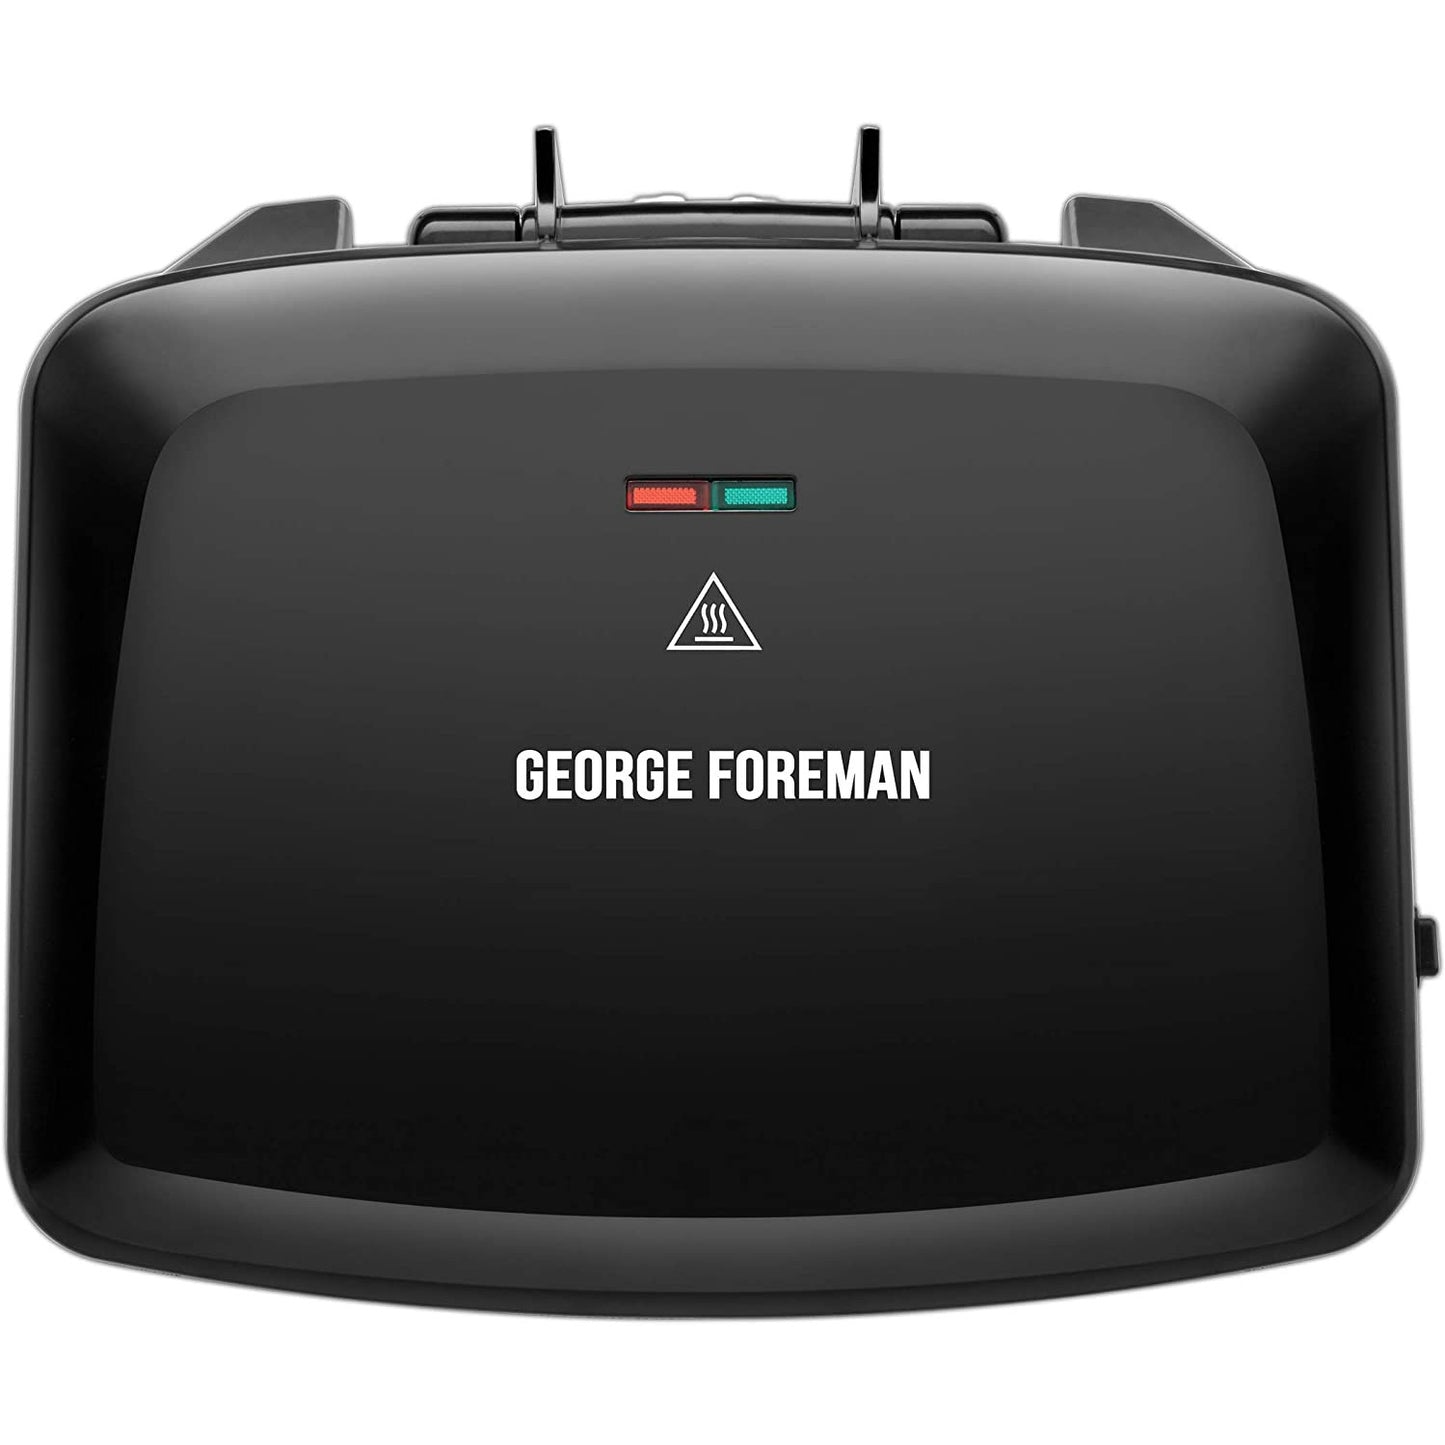 George Foreman grill 24330